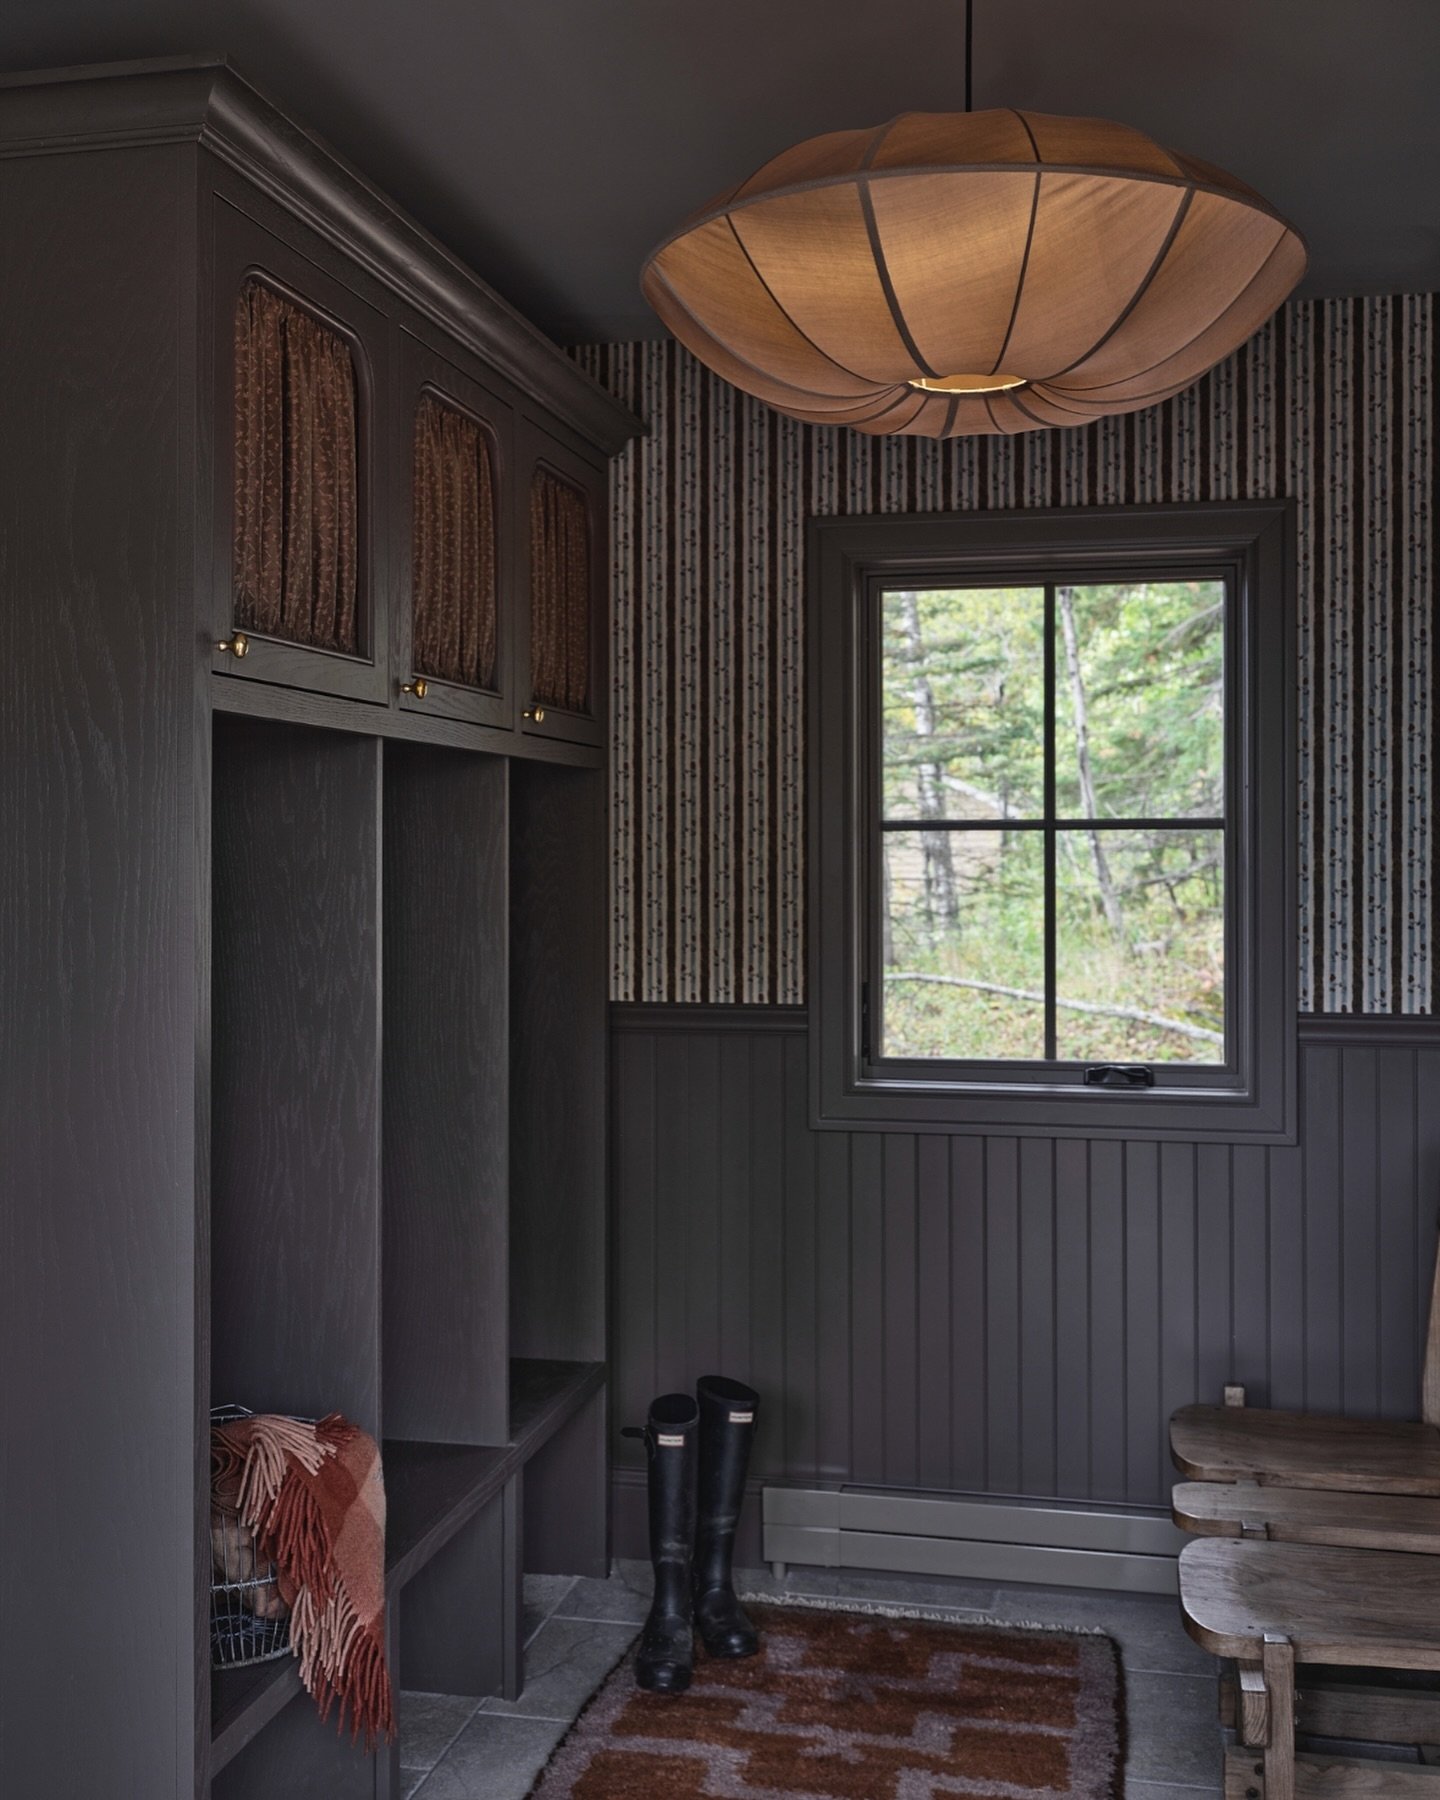 The @yondcottage has the perfect pint-size mudroom. Packed with all the essentials to make seasonal life enjoyable. We couldn&rsquo;t resist the opportunity to integrate custom cabinetry with our fave little fabric panels. You heard it here first: mu